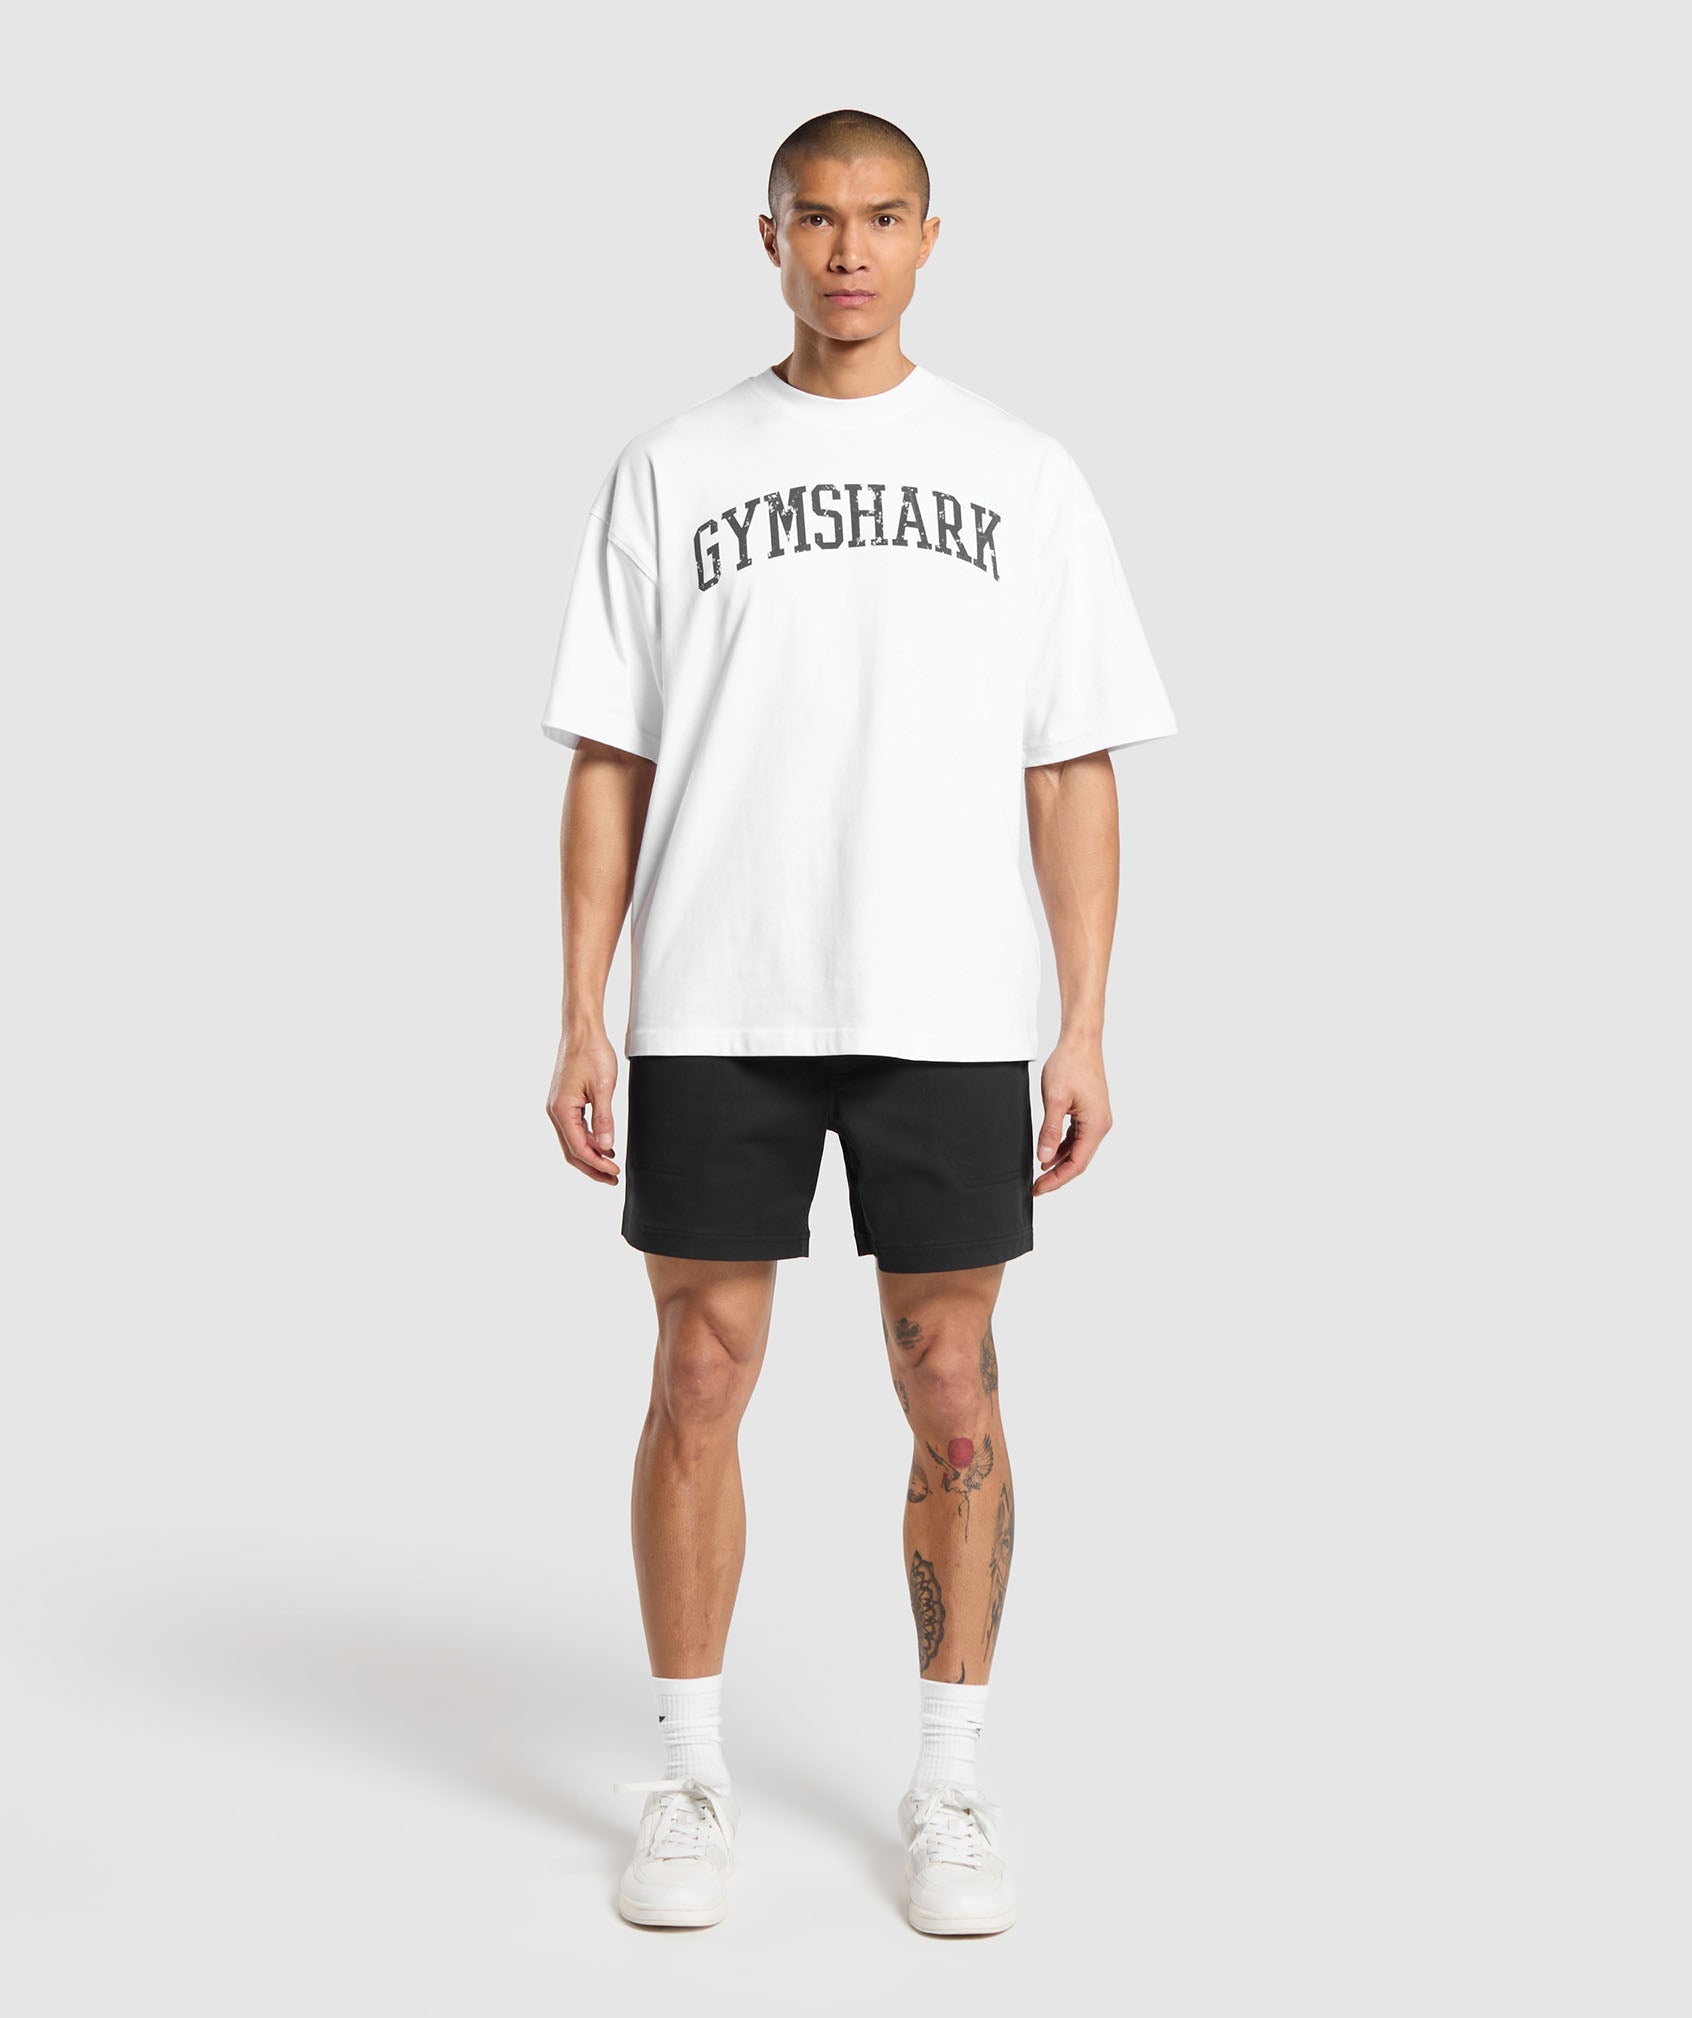 Rest Day Woven Shorts in Black - view 4